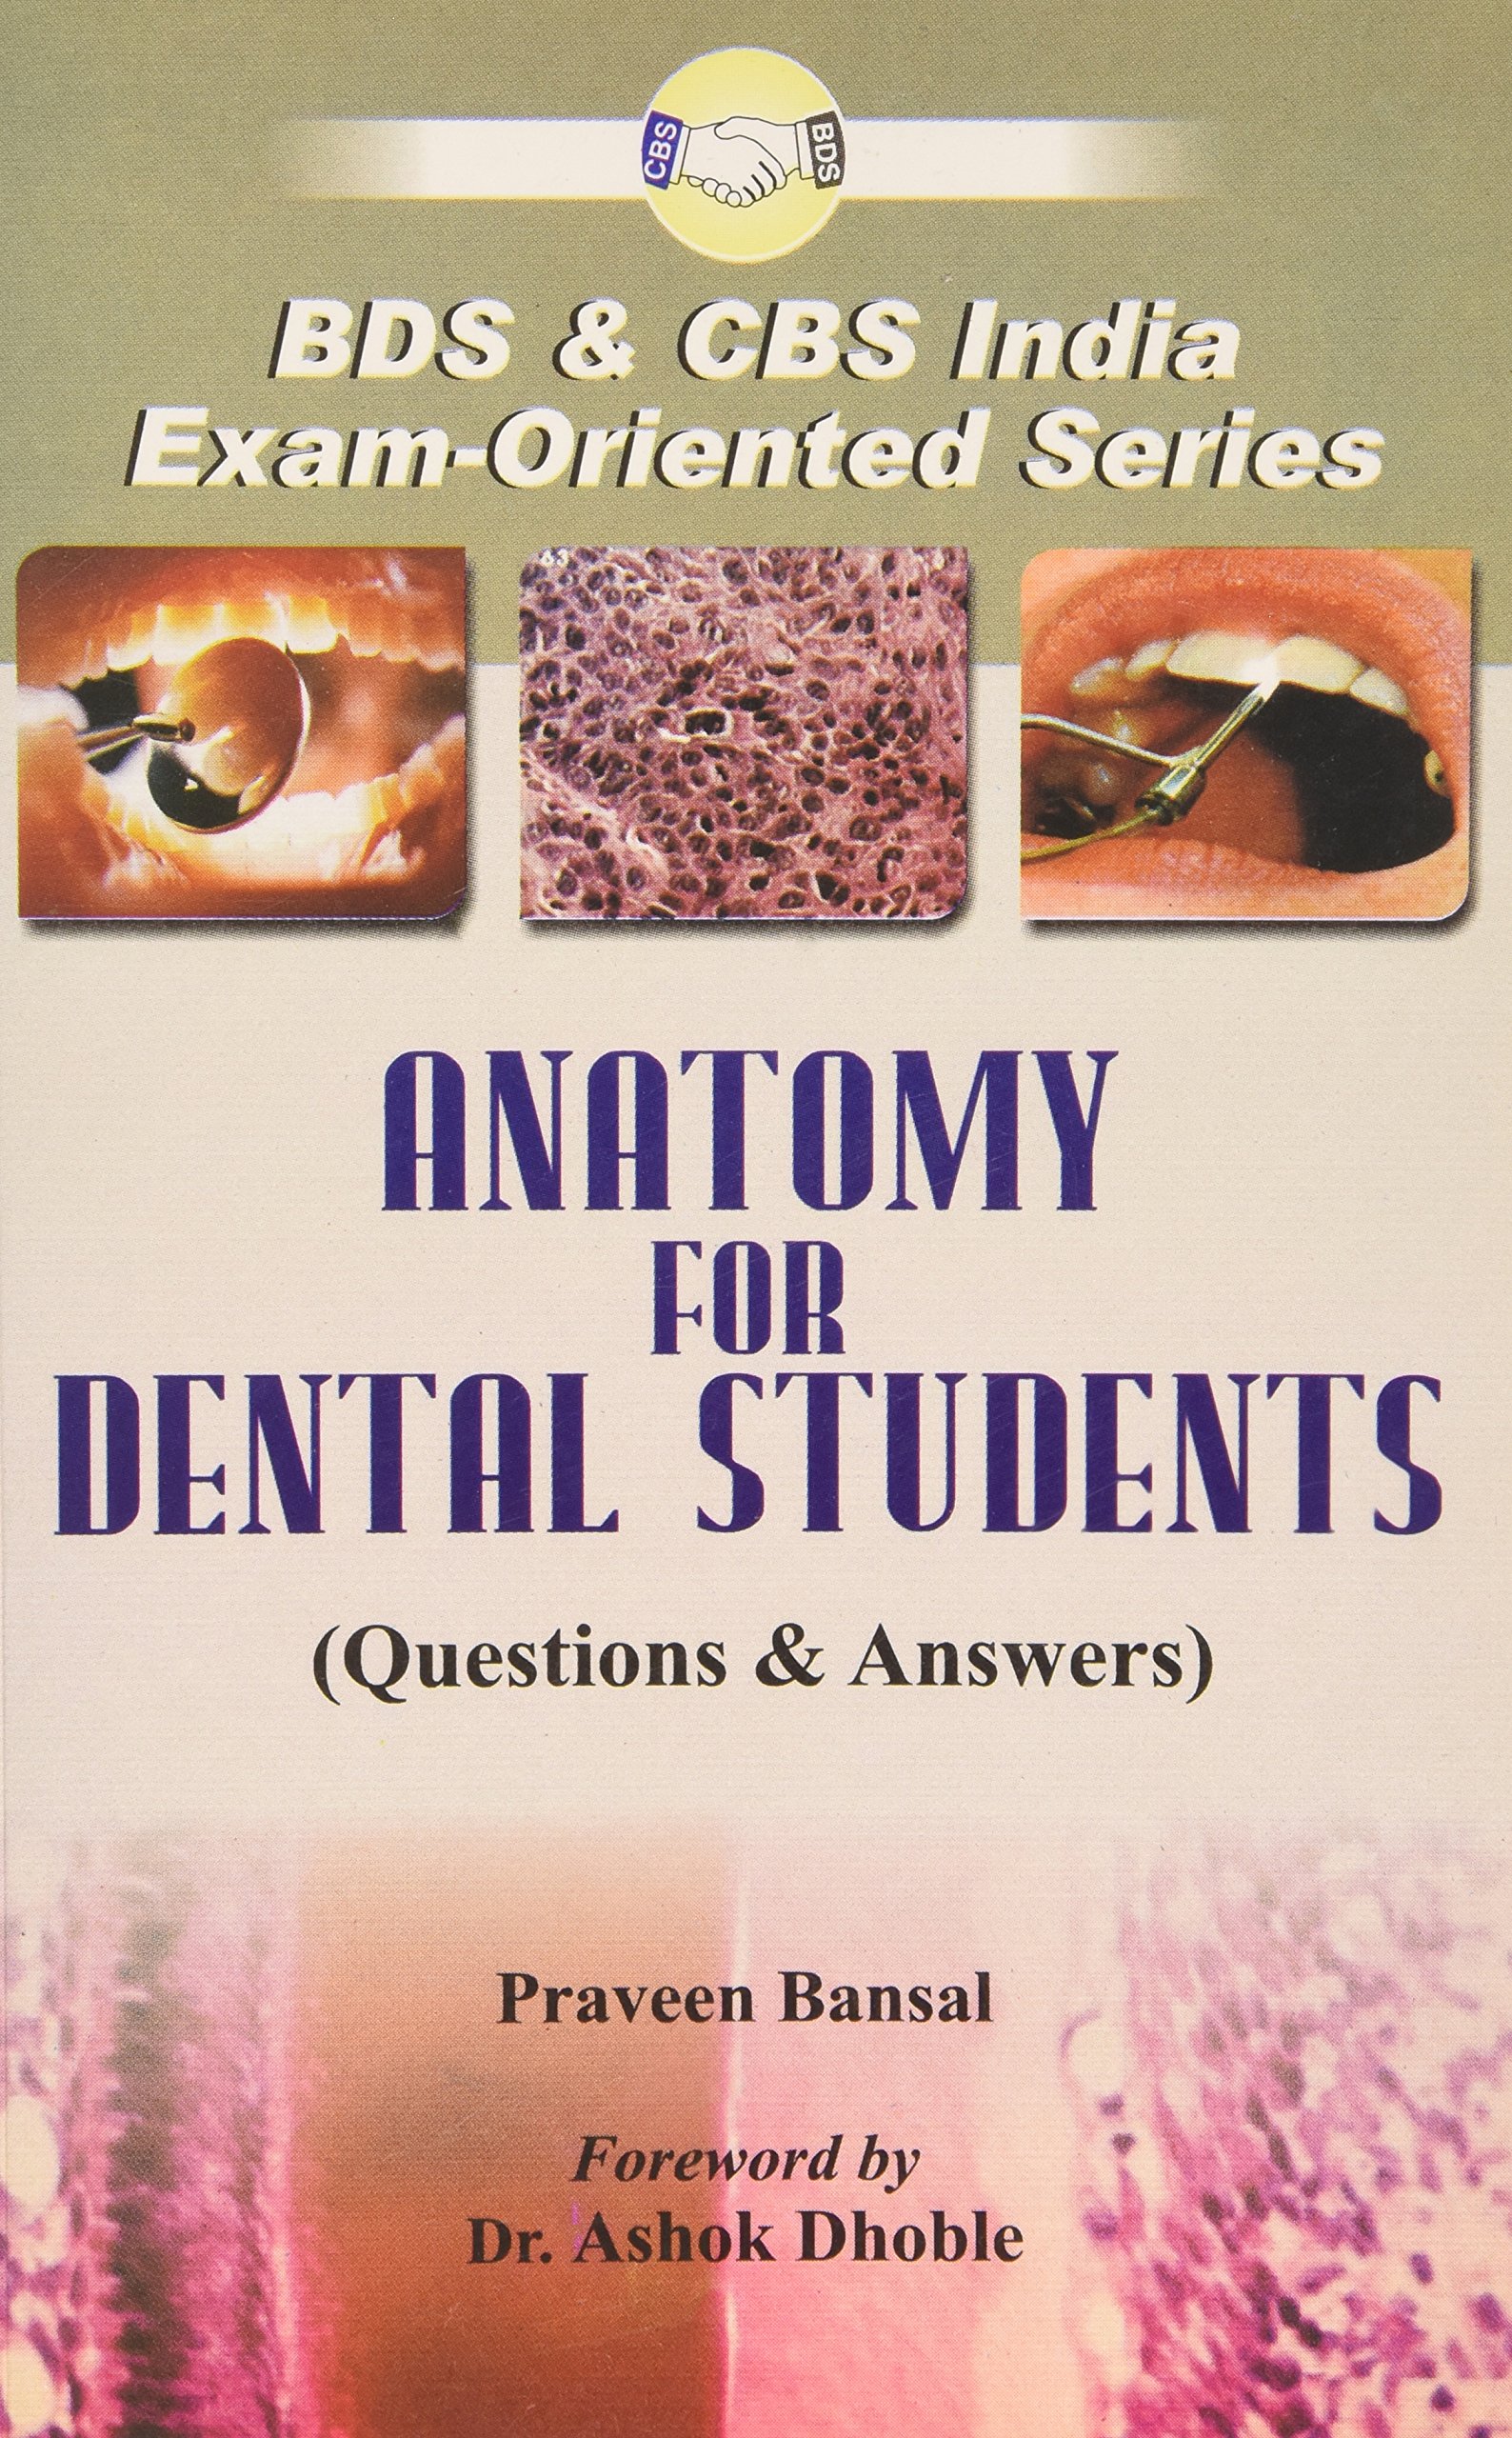 Anatomy For Dental Students: Questions & Answers (Pb)